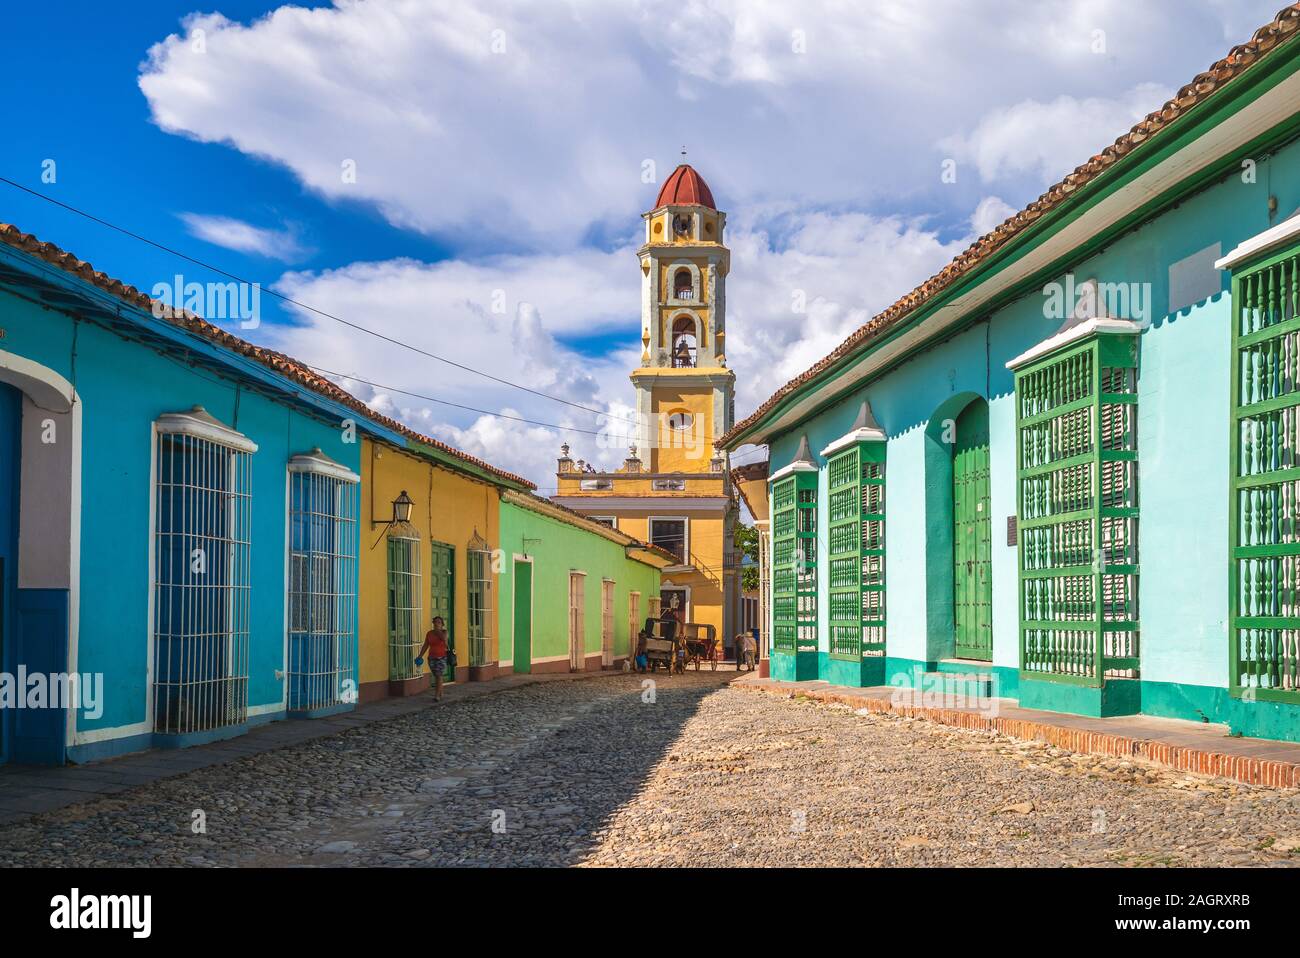 street view and Bell tower of Trinidad, Cuba Stock Photo